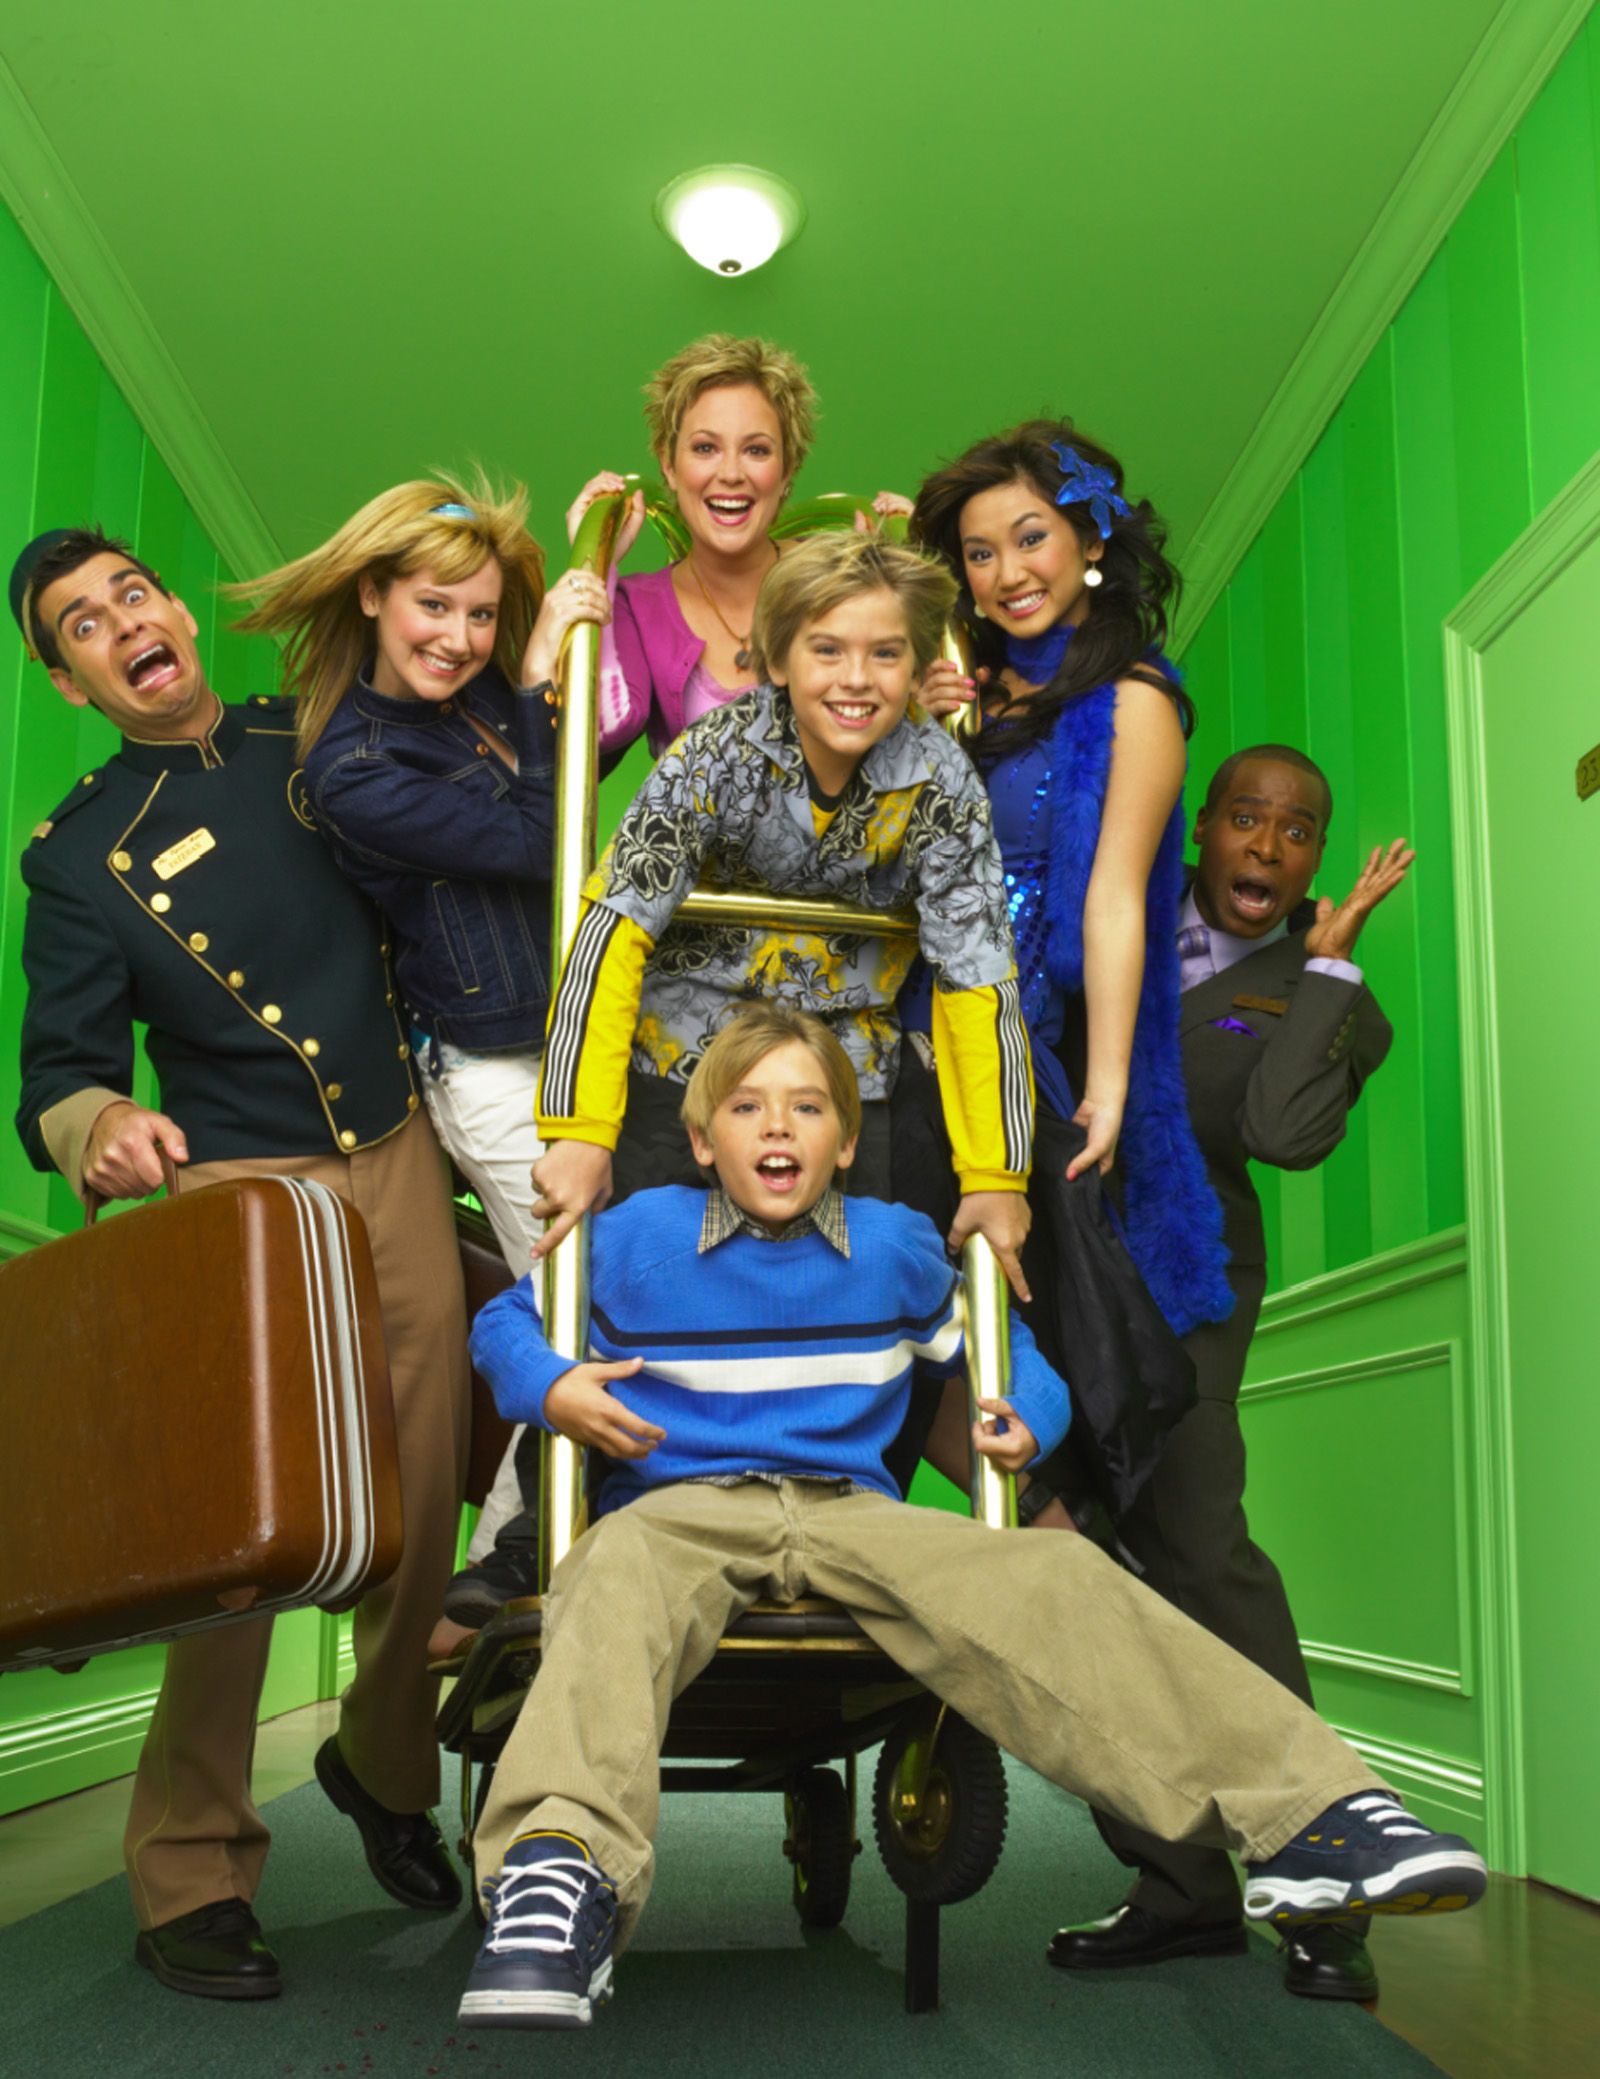 suite life of zack and cody season 3 episode 3